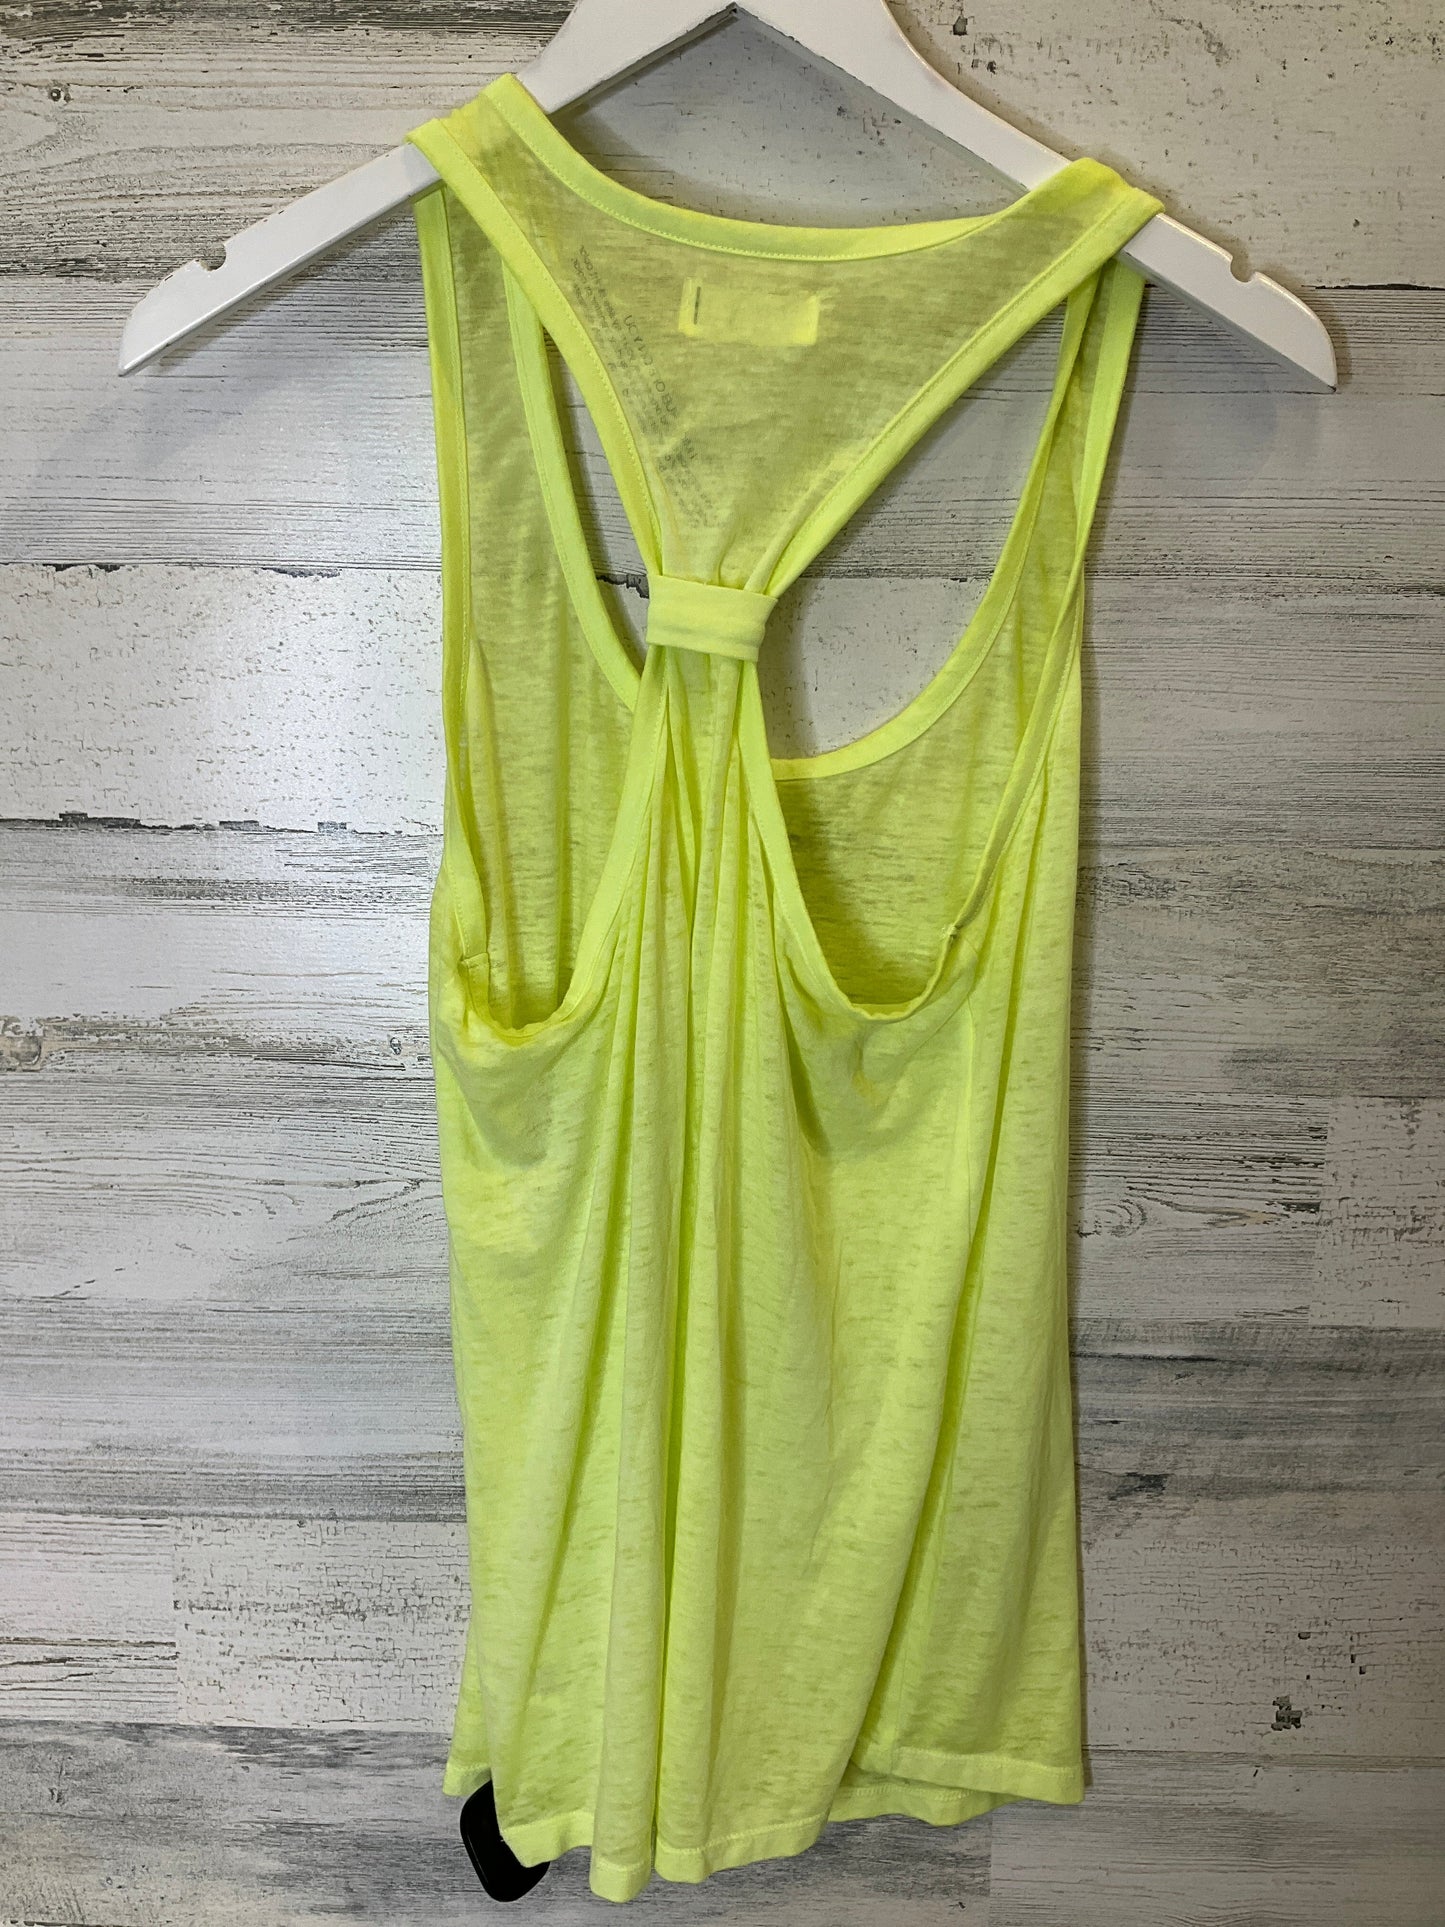 Yellow Athletic Tank Top Maurices, Size S